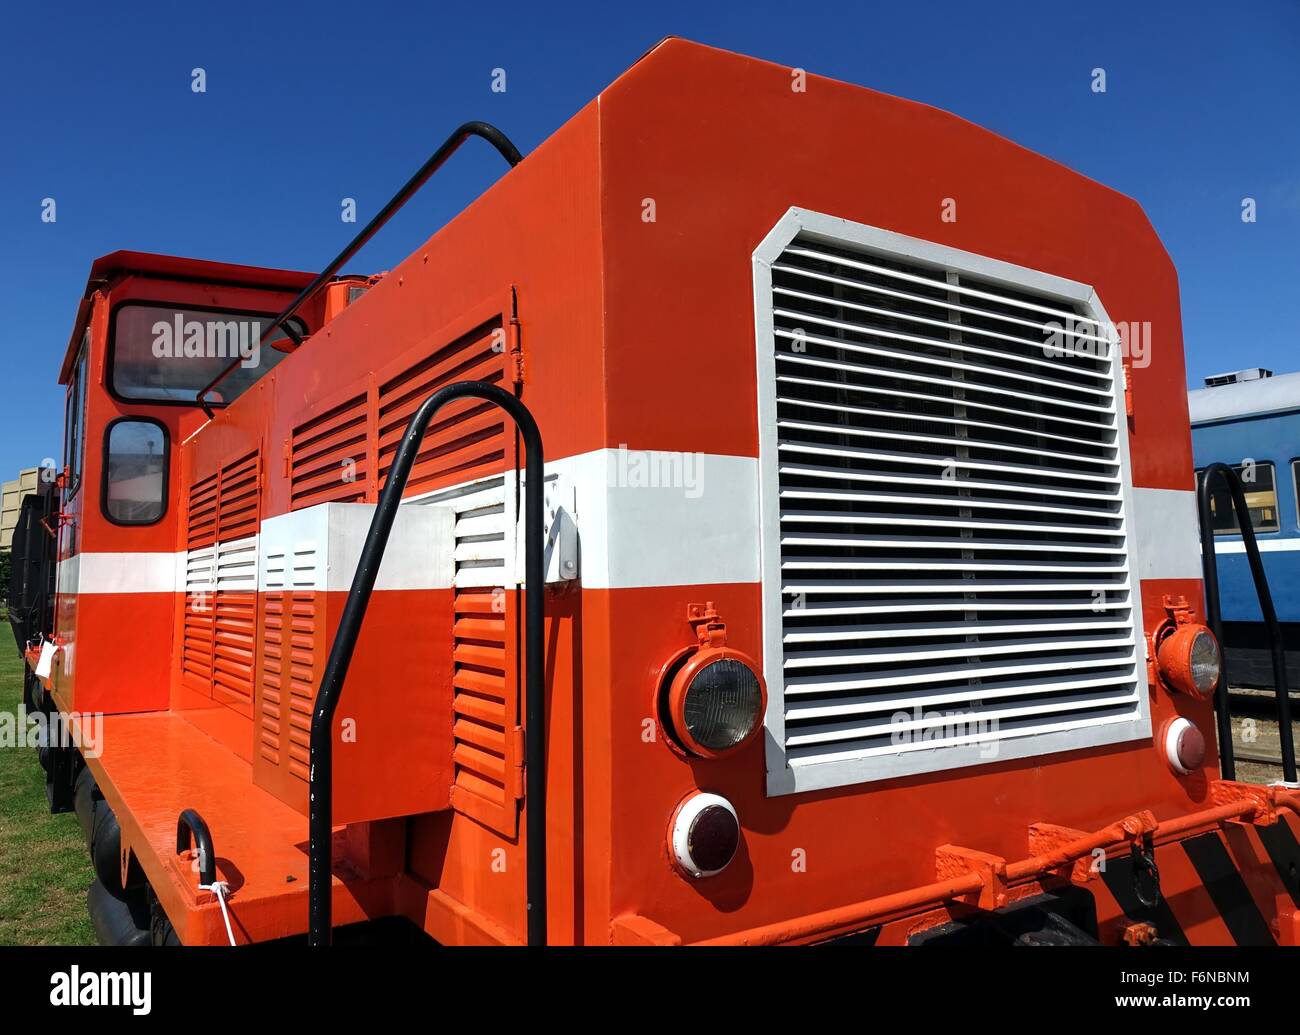 A vintage diesel engine in red and white against a blue sky Stock Photo